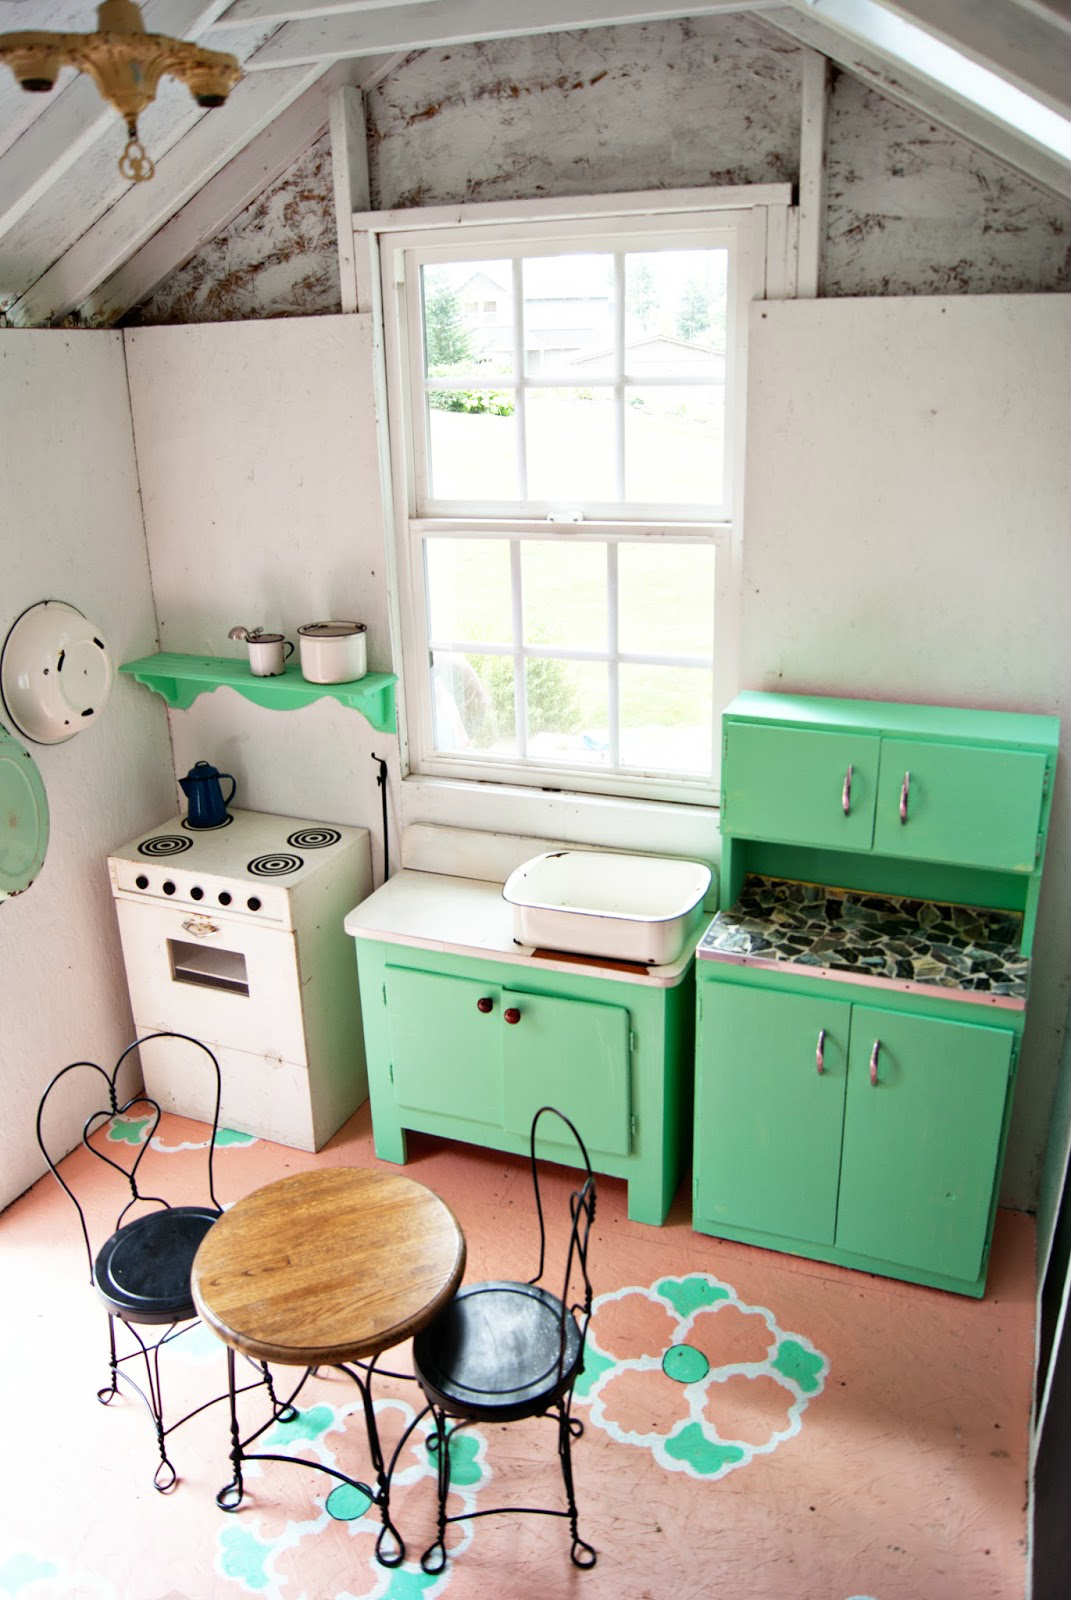 10 Amazingly Awesome Cubby Houses Part 3 - Tinyme Blog